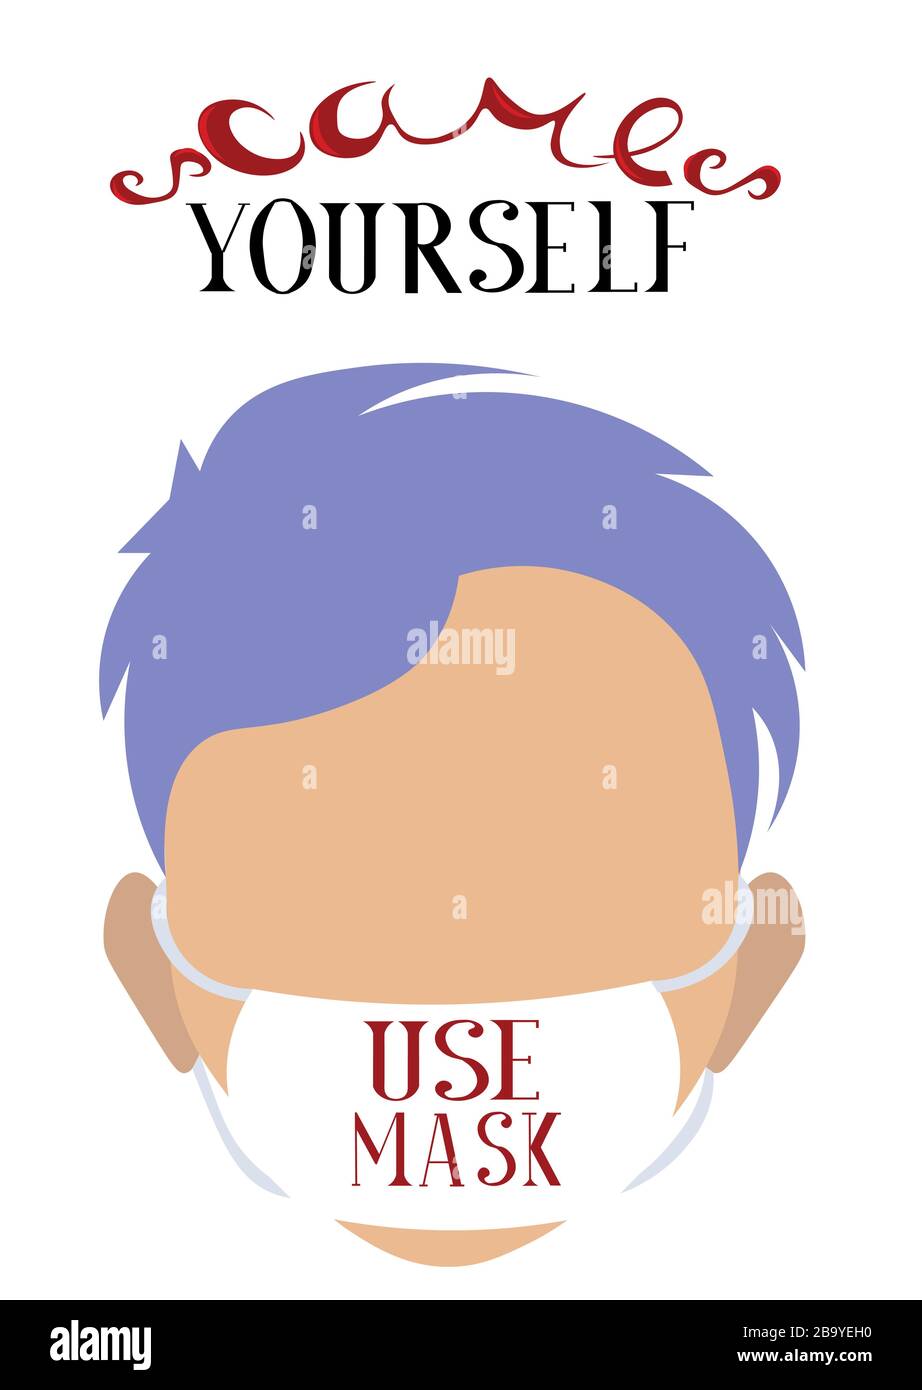 Take care of yourself. Use a mask. Coronavirus. Postcard, information brochure. Preventive measures. Person with blue hair. Stock Vector